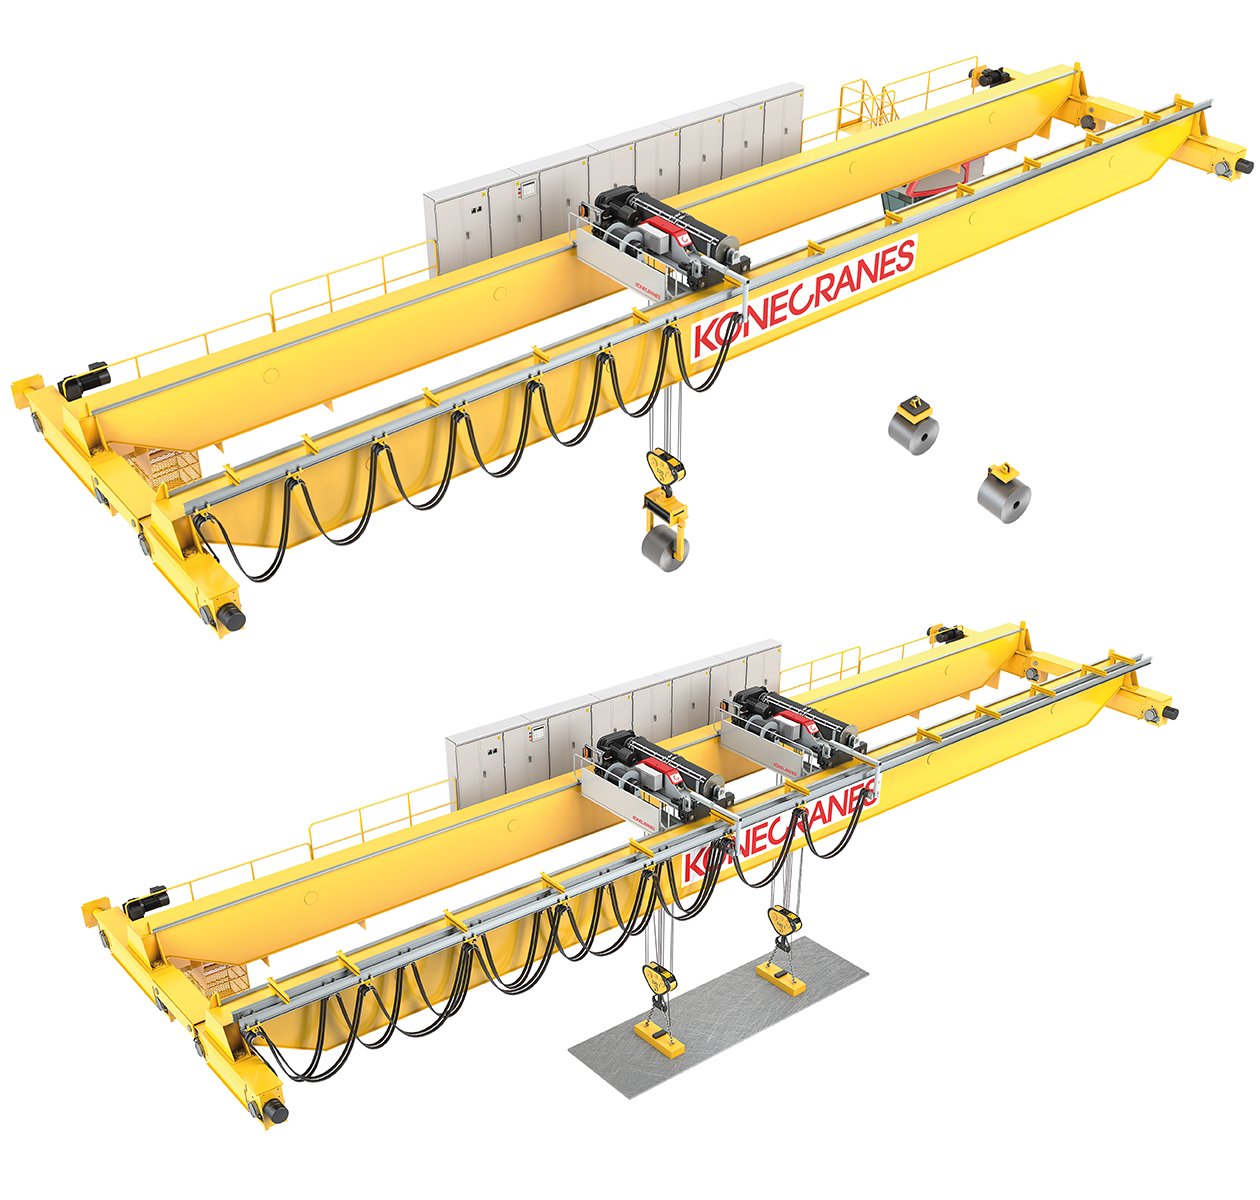 Coil and plate handling cranes